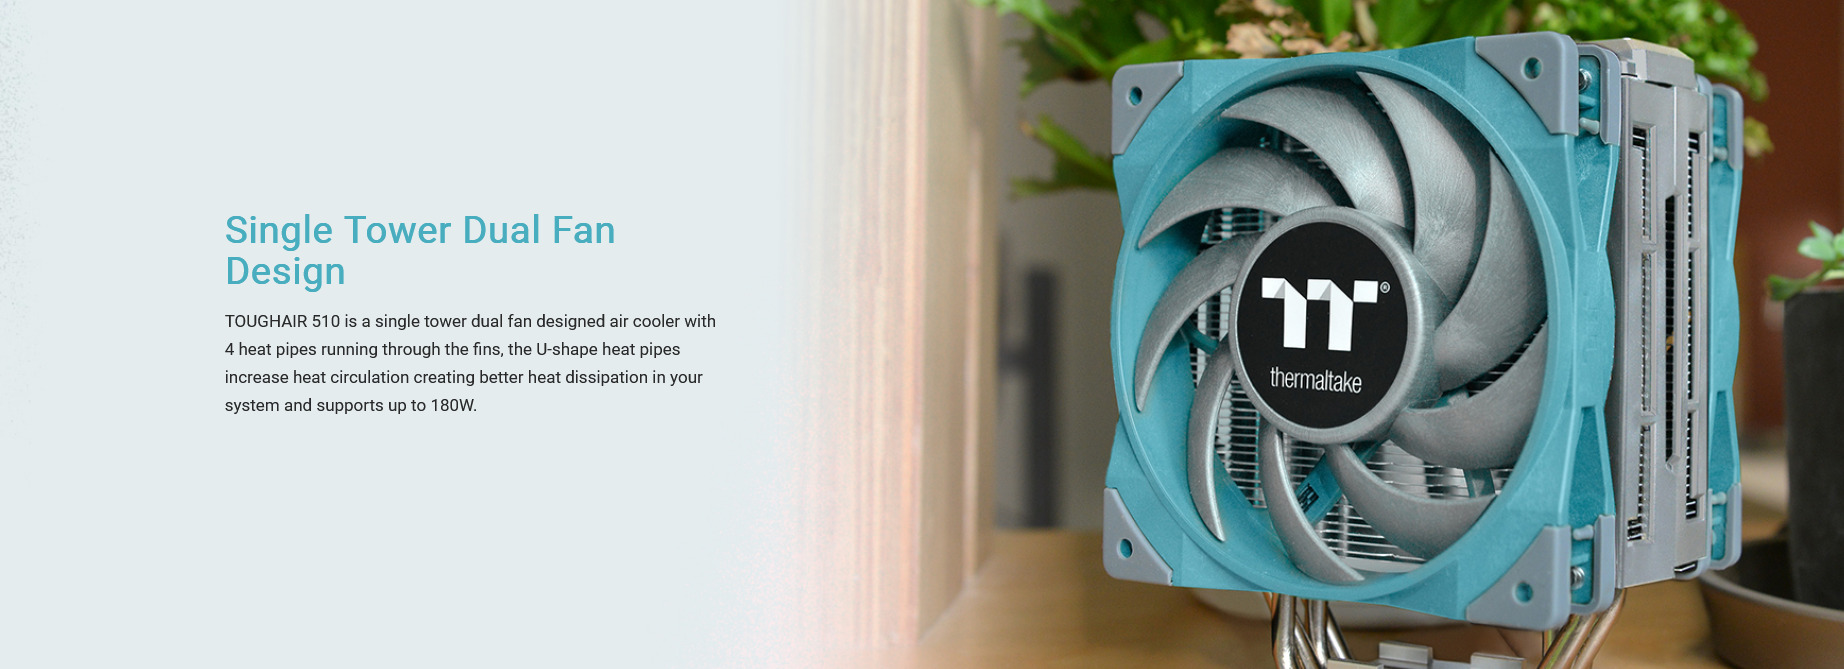 A large marketing image providing additional information about the product Thermaltake Toughair 510 - Dual Fan CPU Cooler (Turquoise) - Additional alt info not provided